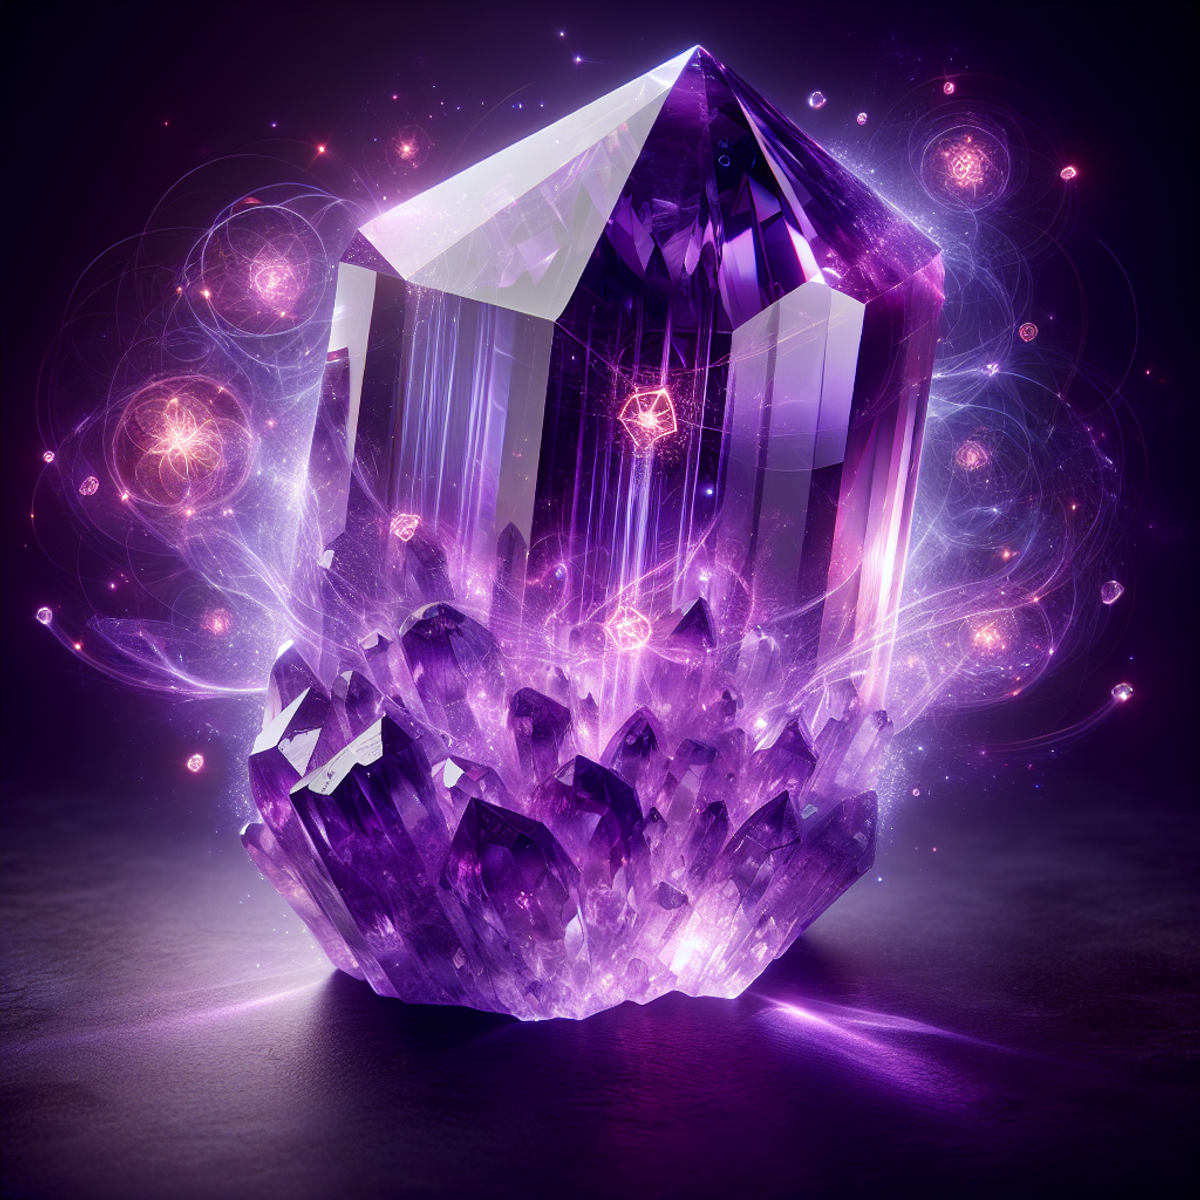 A large amethyst crystal glowing with vibrant purple light, emanating spiritual energy in ethereal waves.